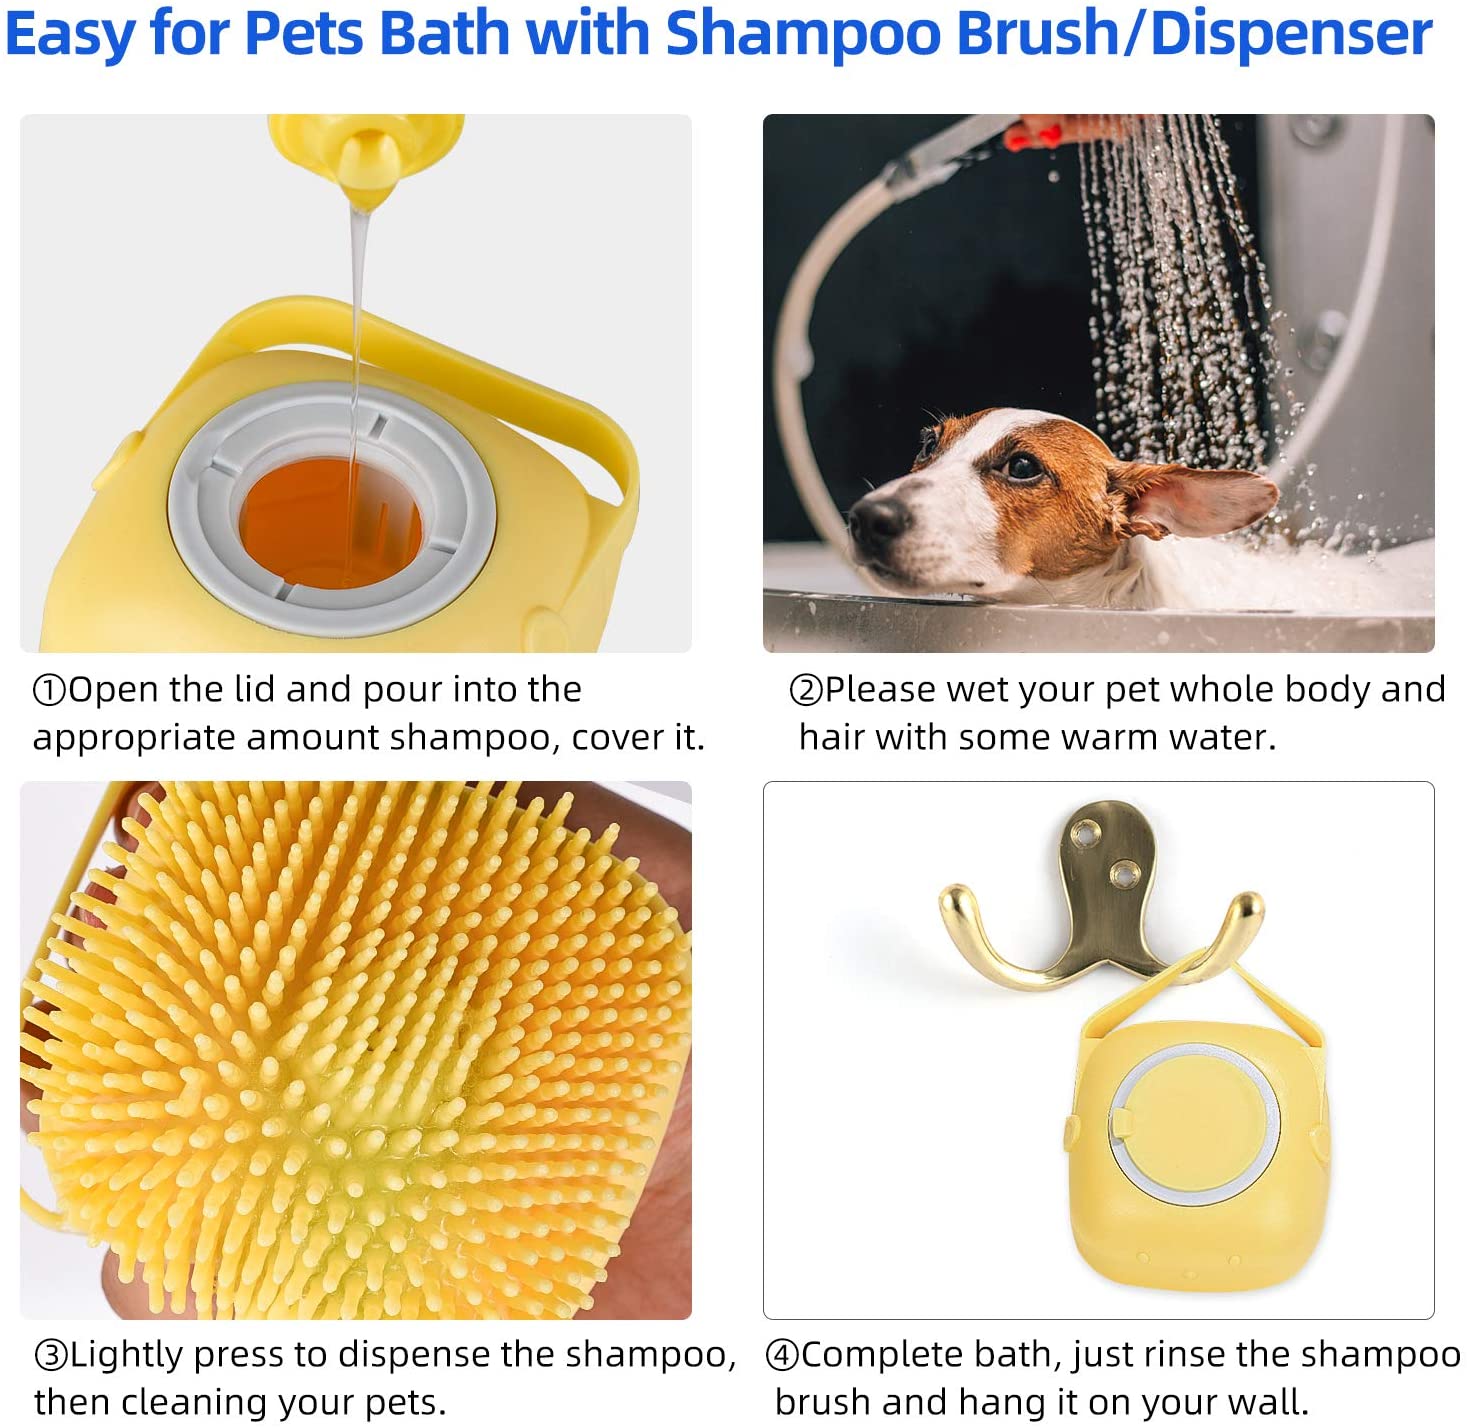 Pet Shampoo Grooming Brush for Bathing and Shedding Short Hair Soft Silicone Rubber Bristle Brushes Massage Comb - BestBuddyStore